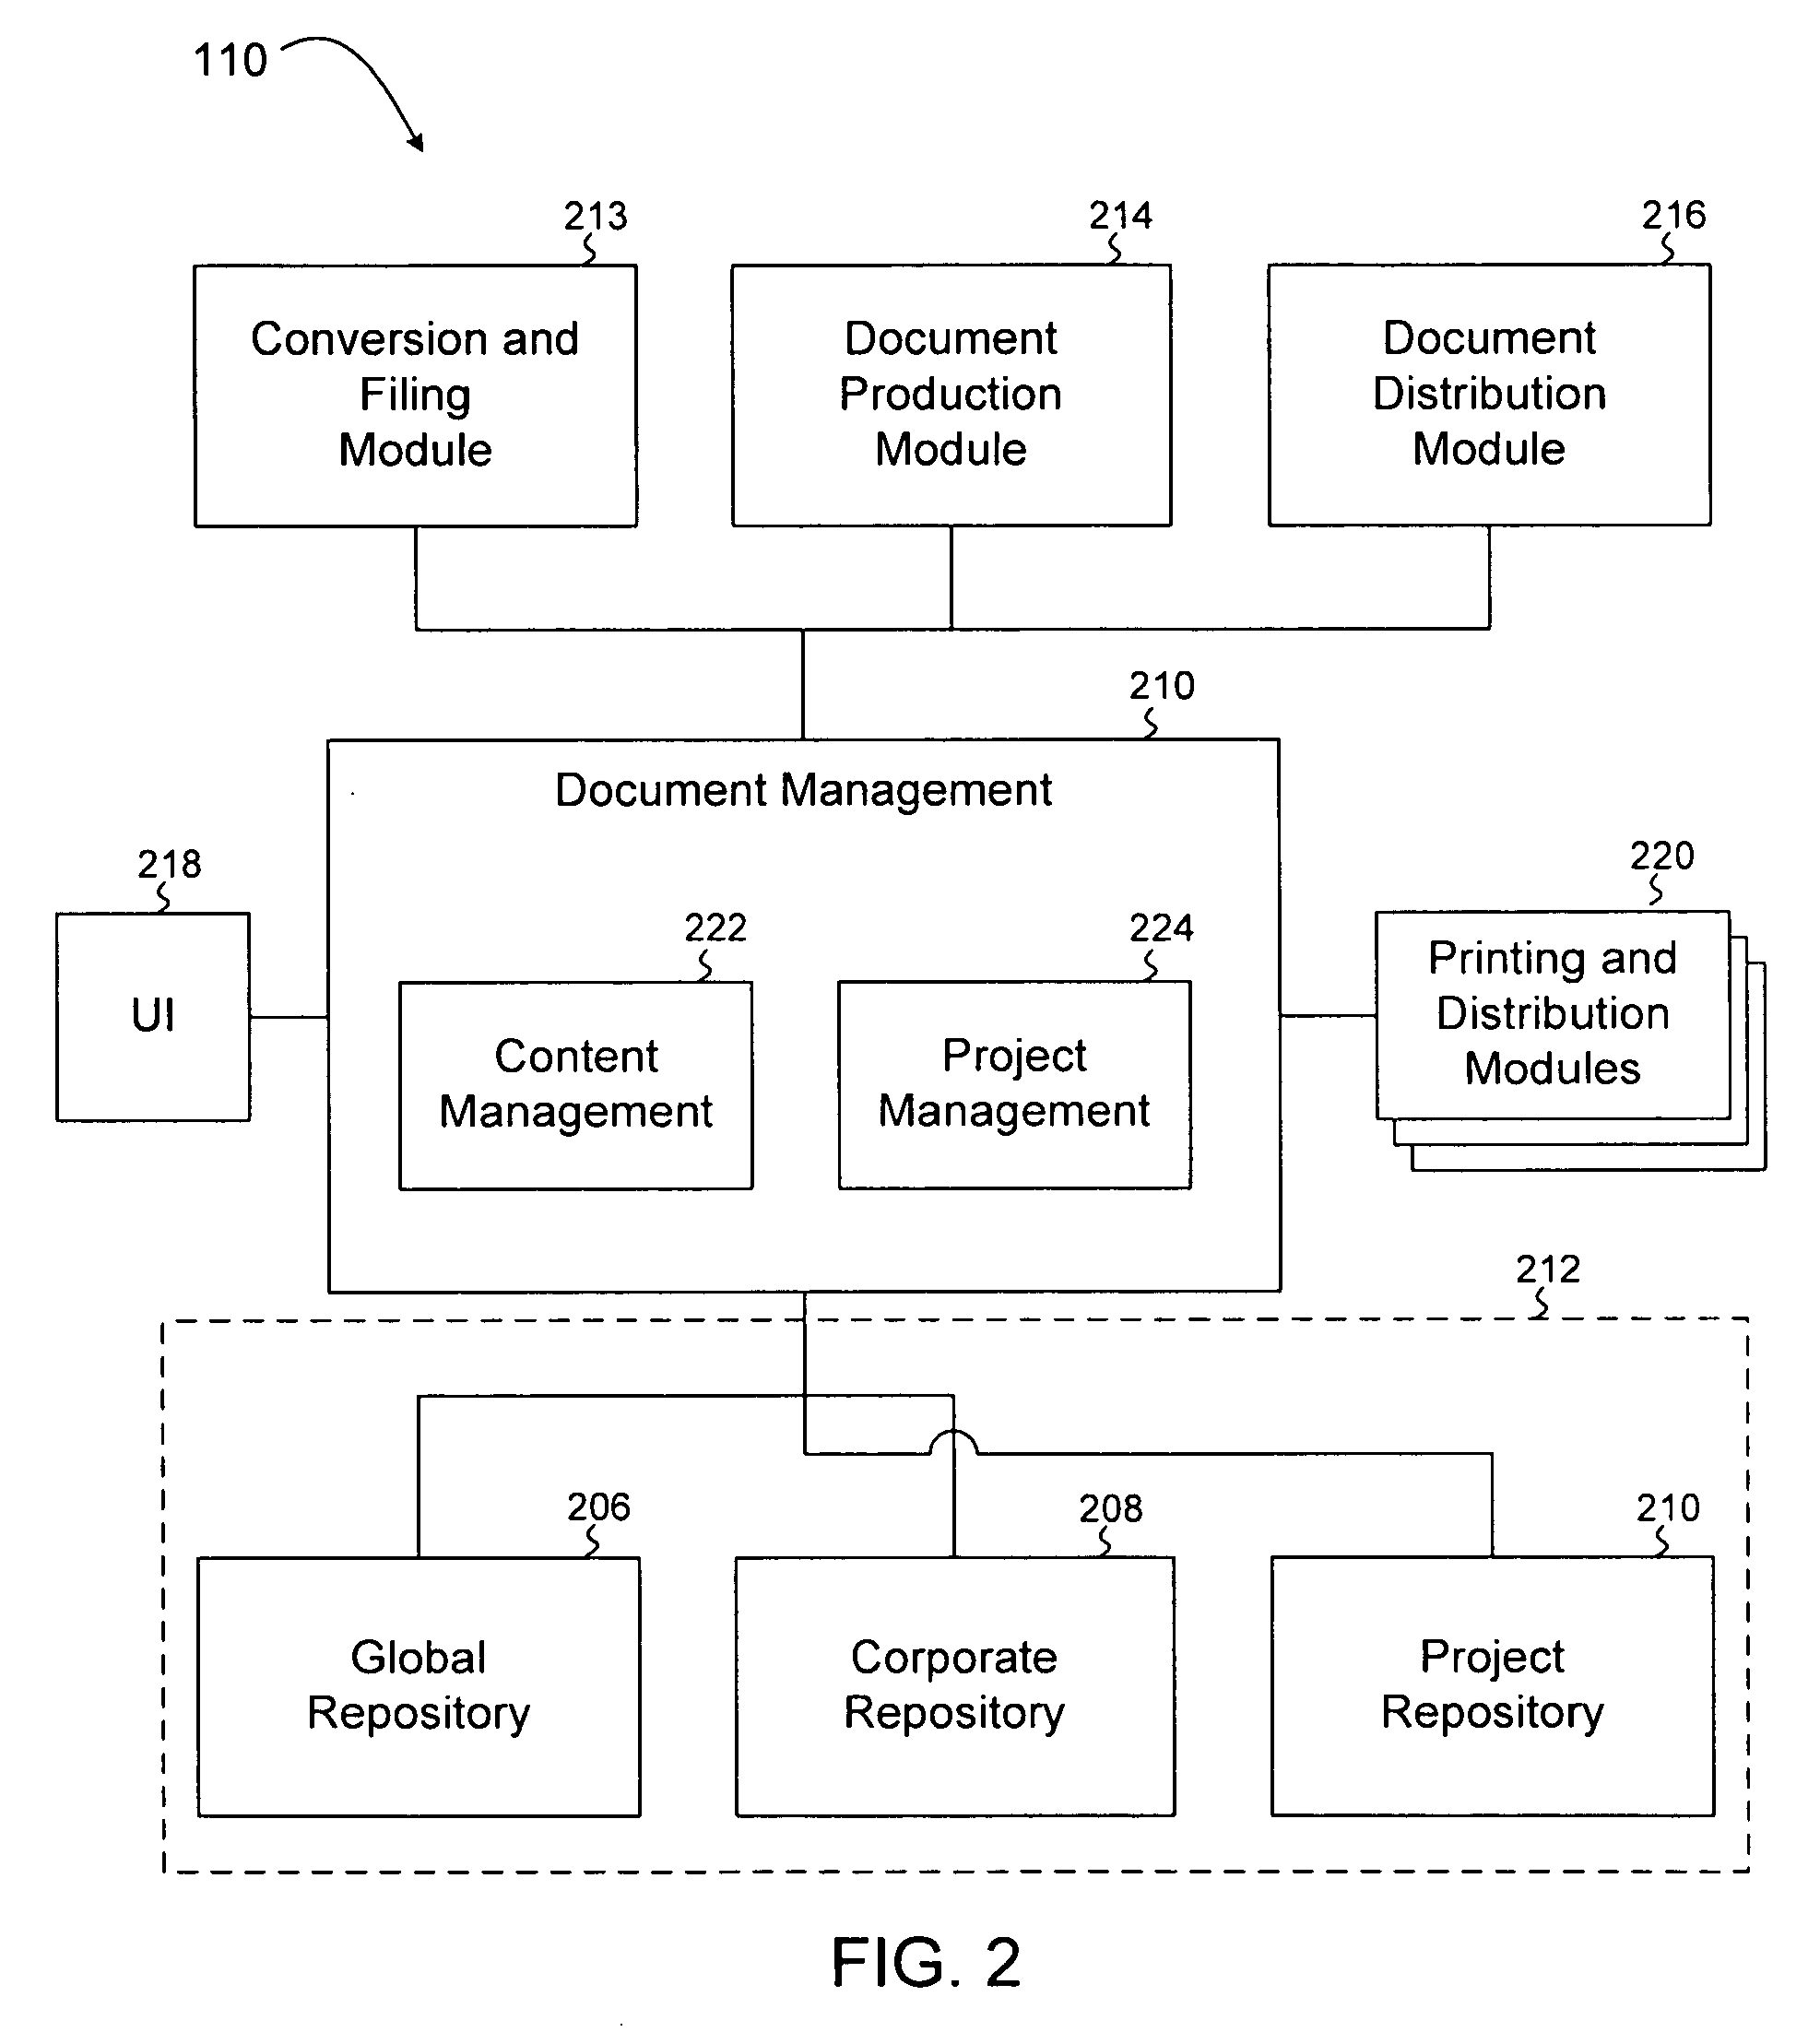 Systems and methods for document project management, conversion, and filing